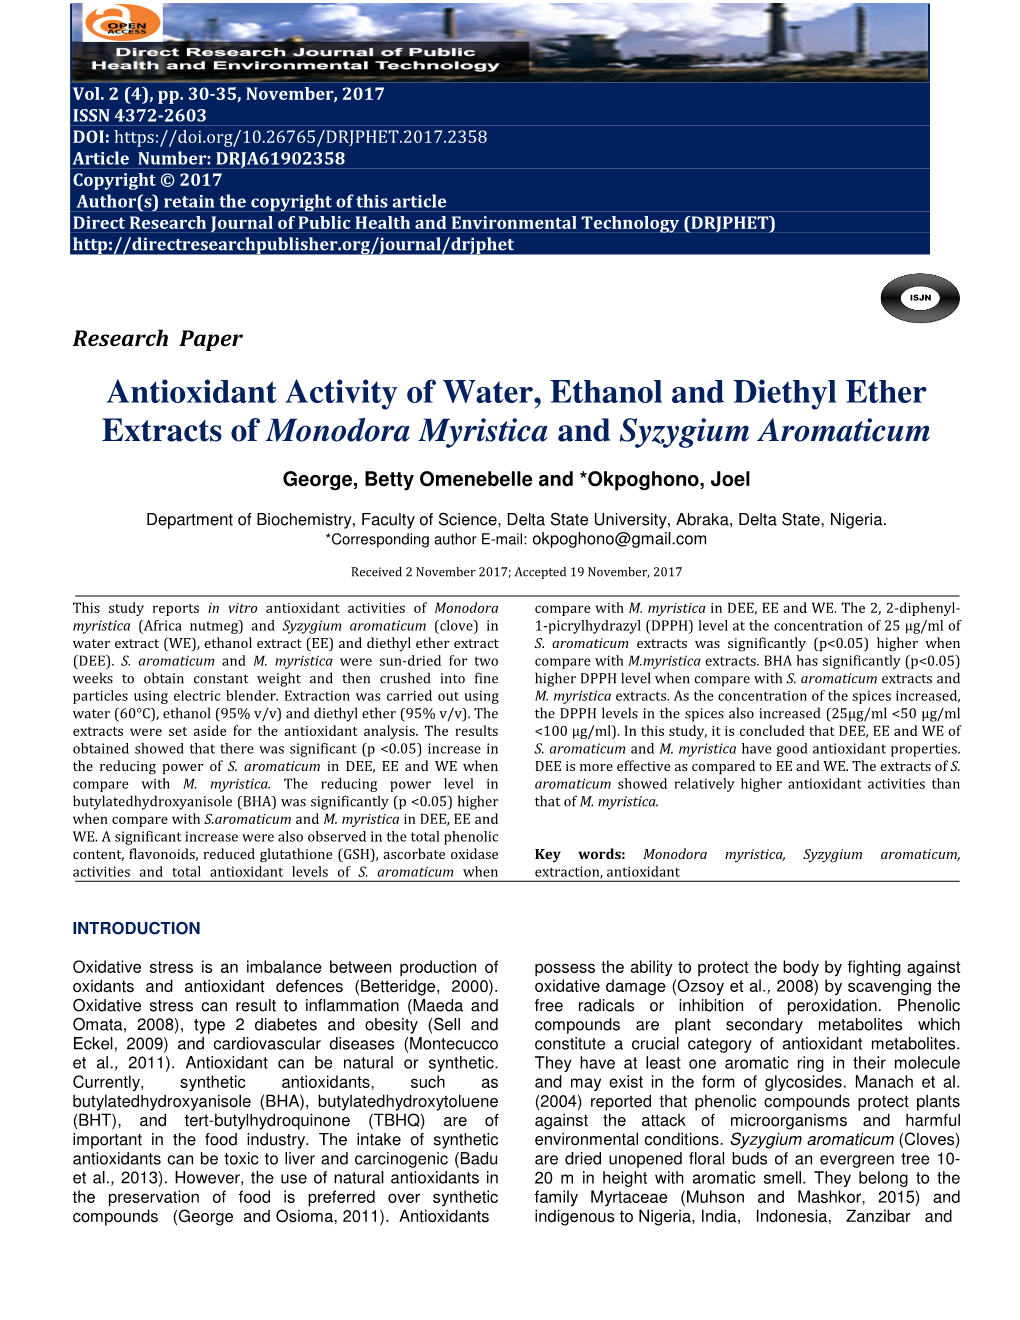 Antioxidant Activity of Water, Ethanol and Diethyl Ether Extracts of Monodora Myristica and Syzygium Aromaticum